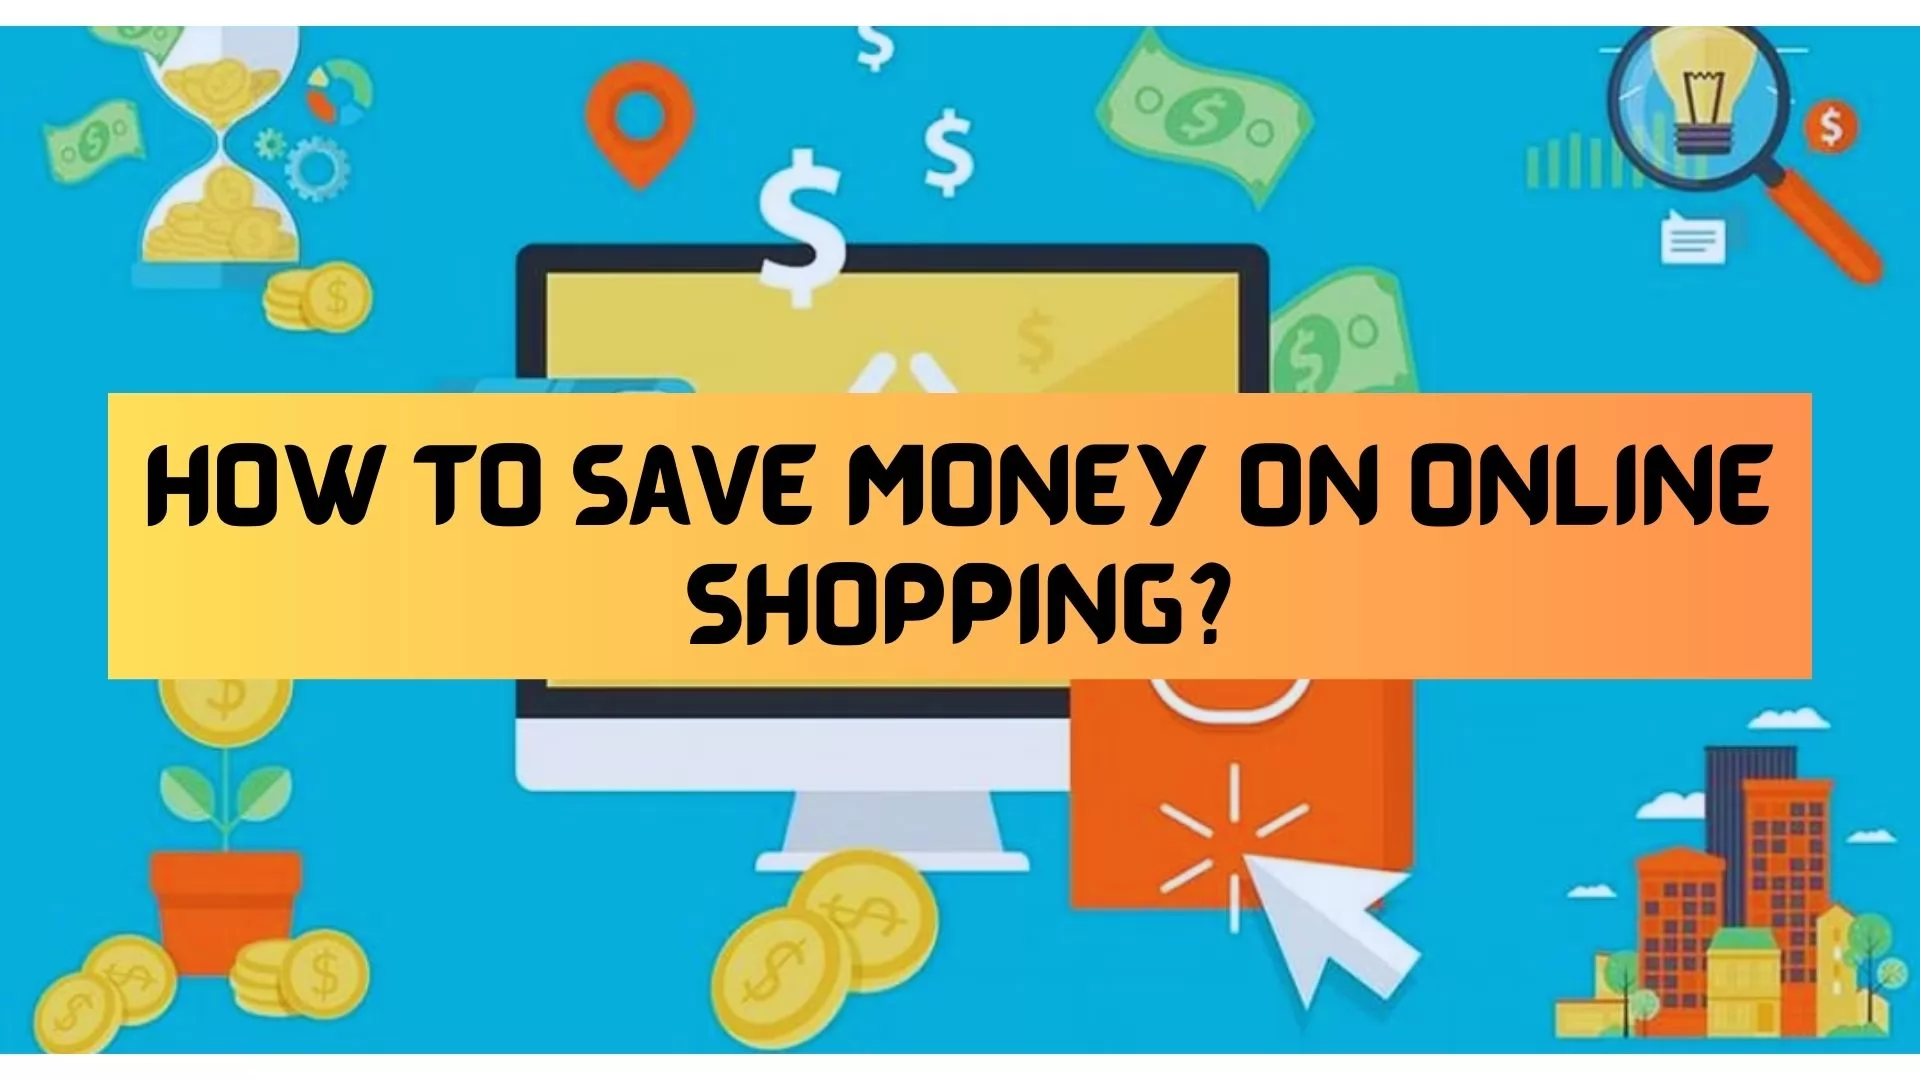 How to Save Money on Online Shopping